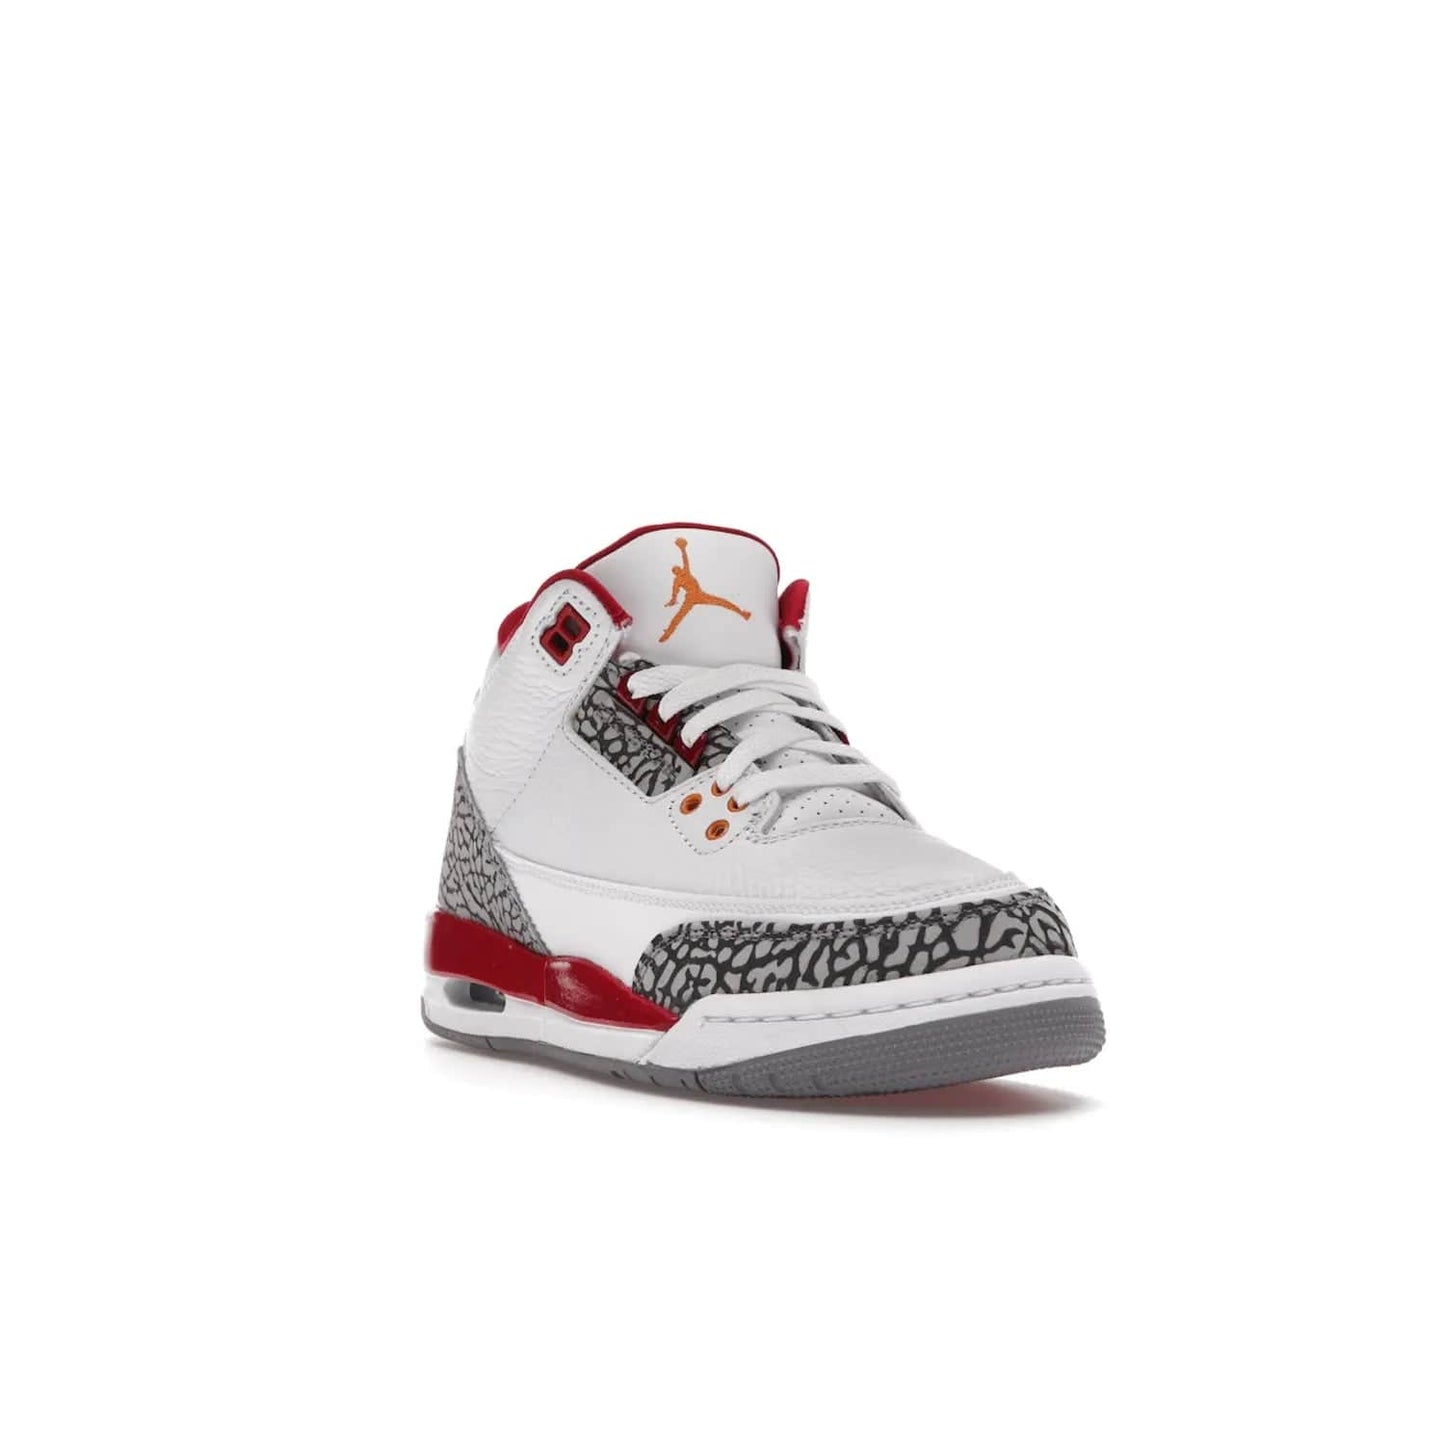 Jordan 3 Retro Cardinal (GS) - Image 7 - Only at www.BallersClubKickz.com - Shop the kid-sized Air Jordan 3 Retro Cardinal GS, released Feb 2022. White tumbled leather upper, light curry accenting, cement grey and classic red details throughout. Visible Air cushioning, midsole, and an eye-catching outsole. Show off your style with this fashionable streetwear silhouette.